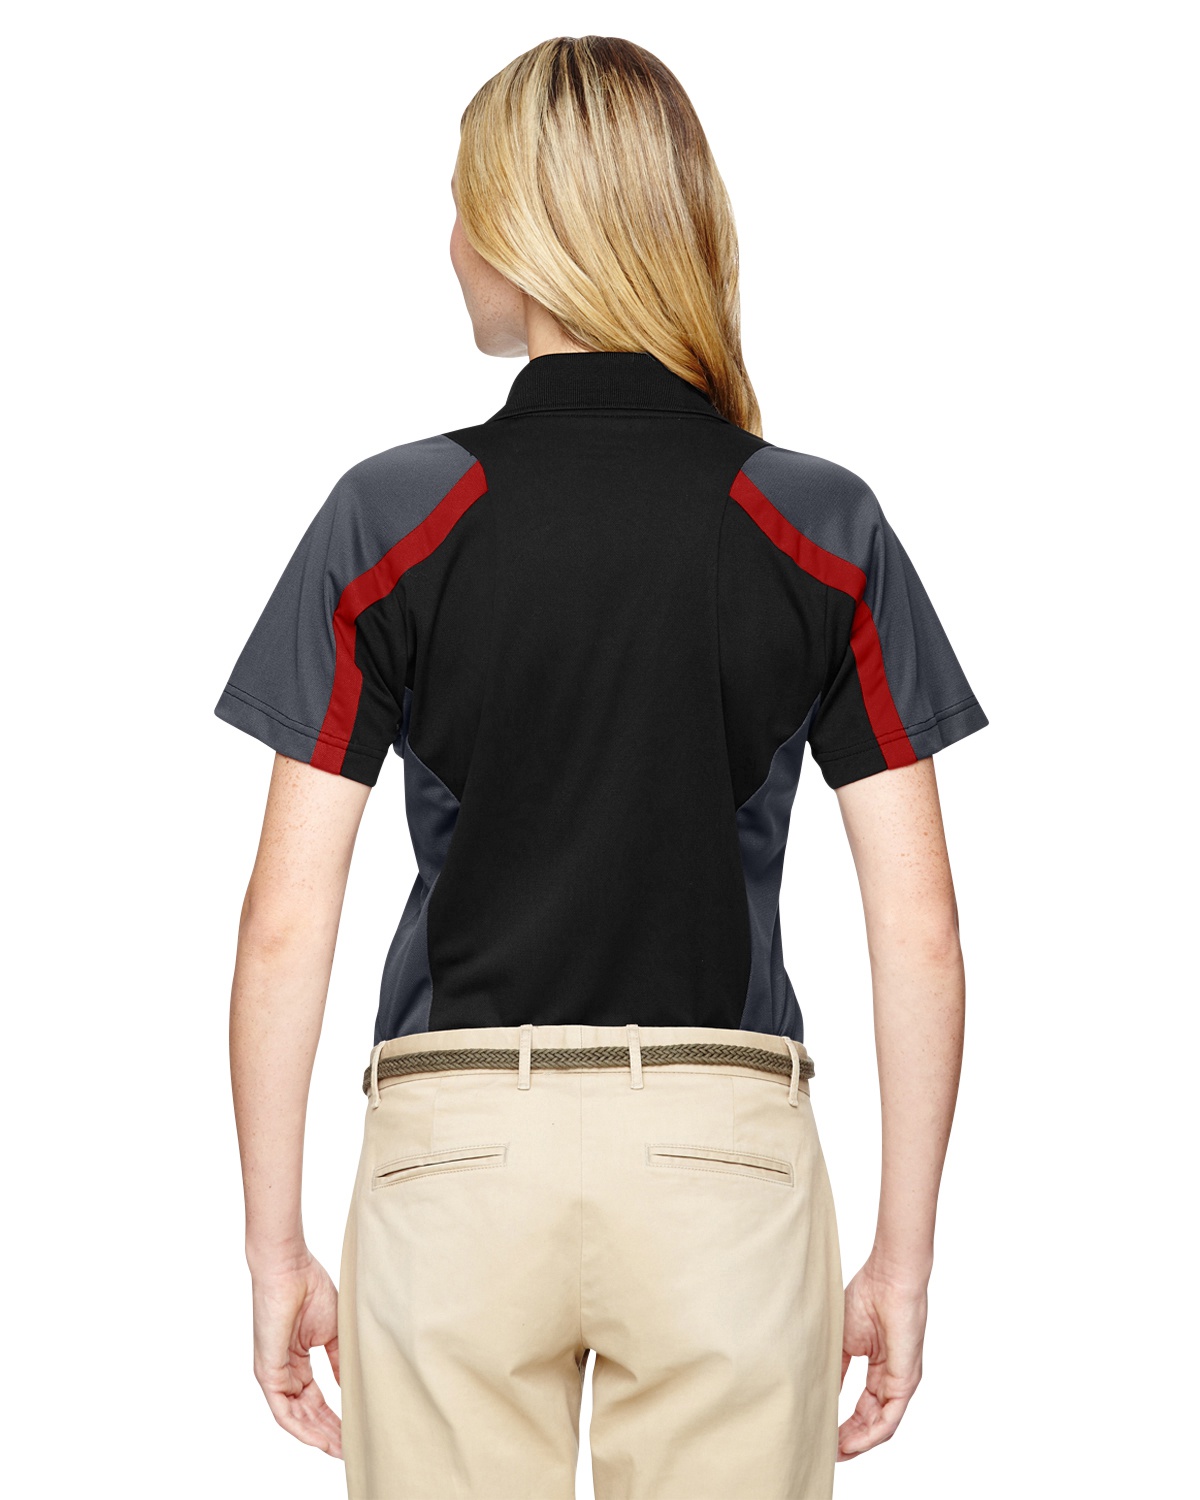 'Ash City - Extreme 75119 Ladies' Eperformance Strike Colorblock Snag Protection Polo'